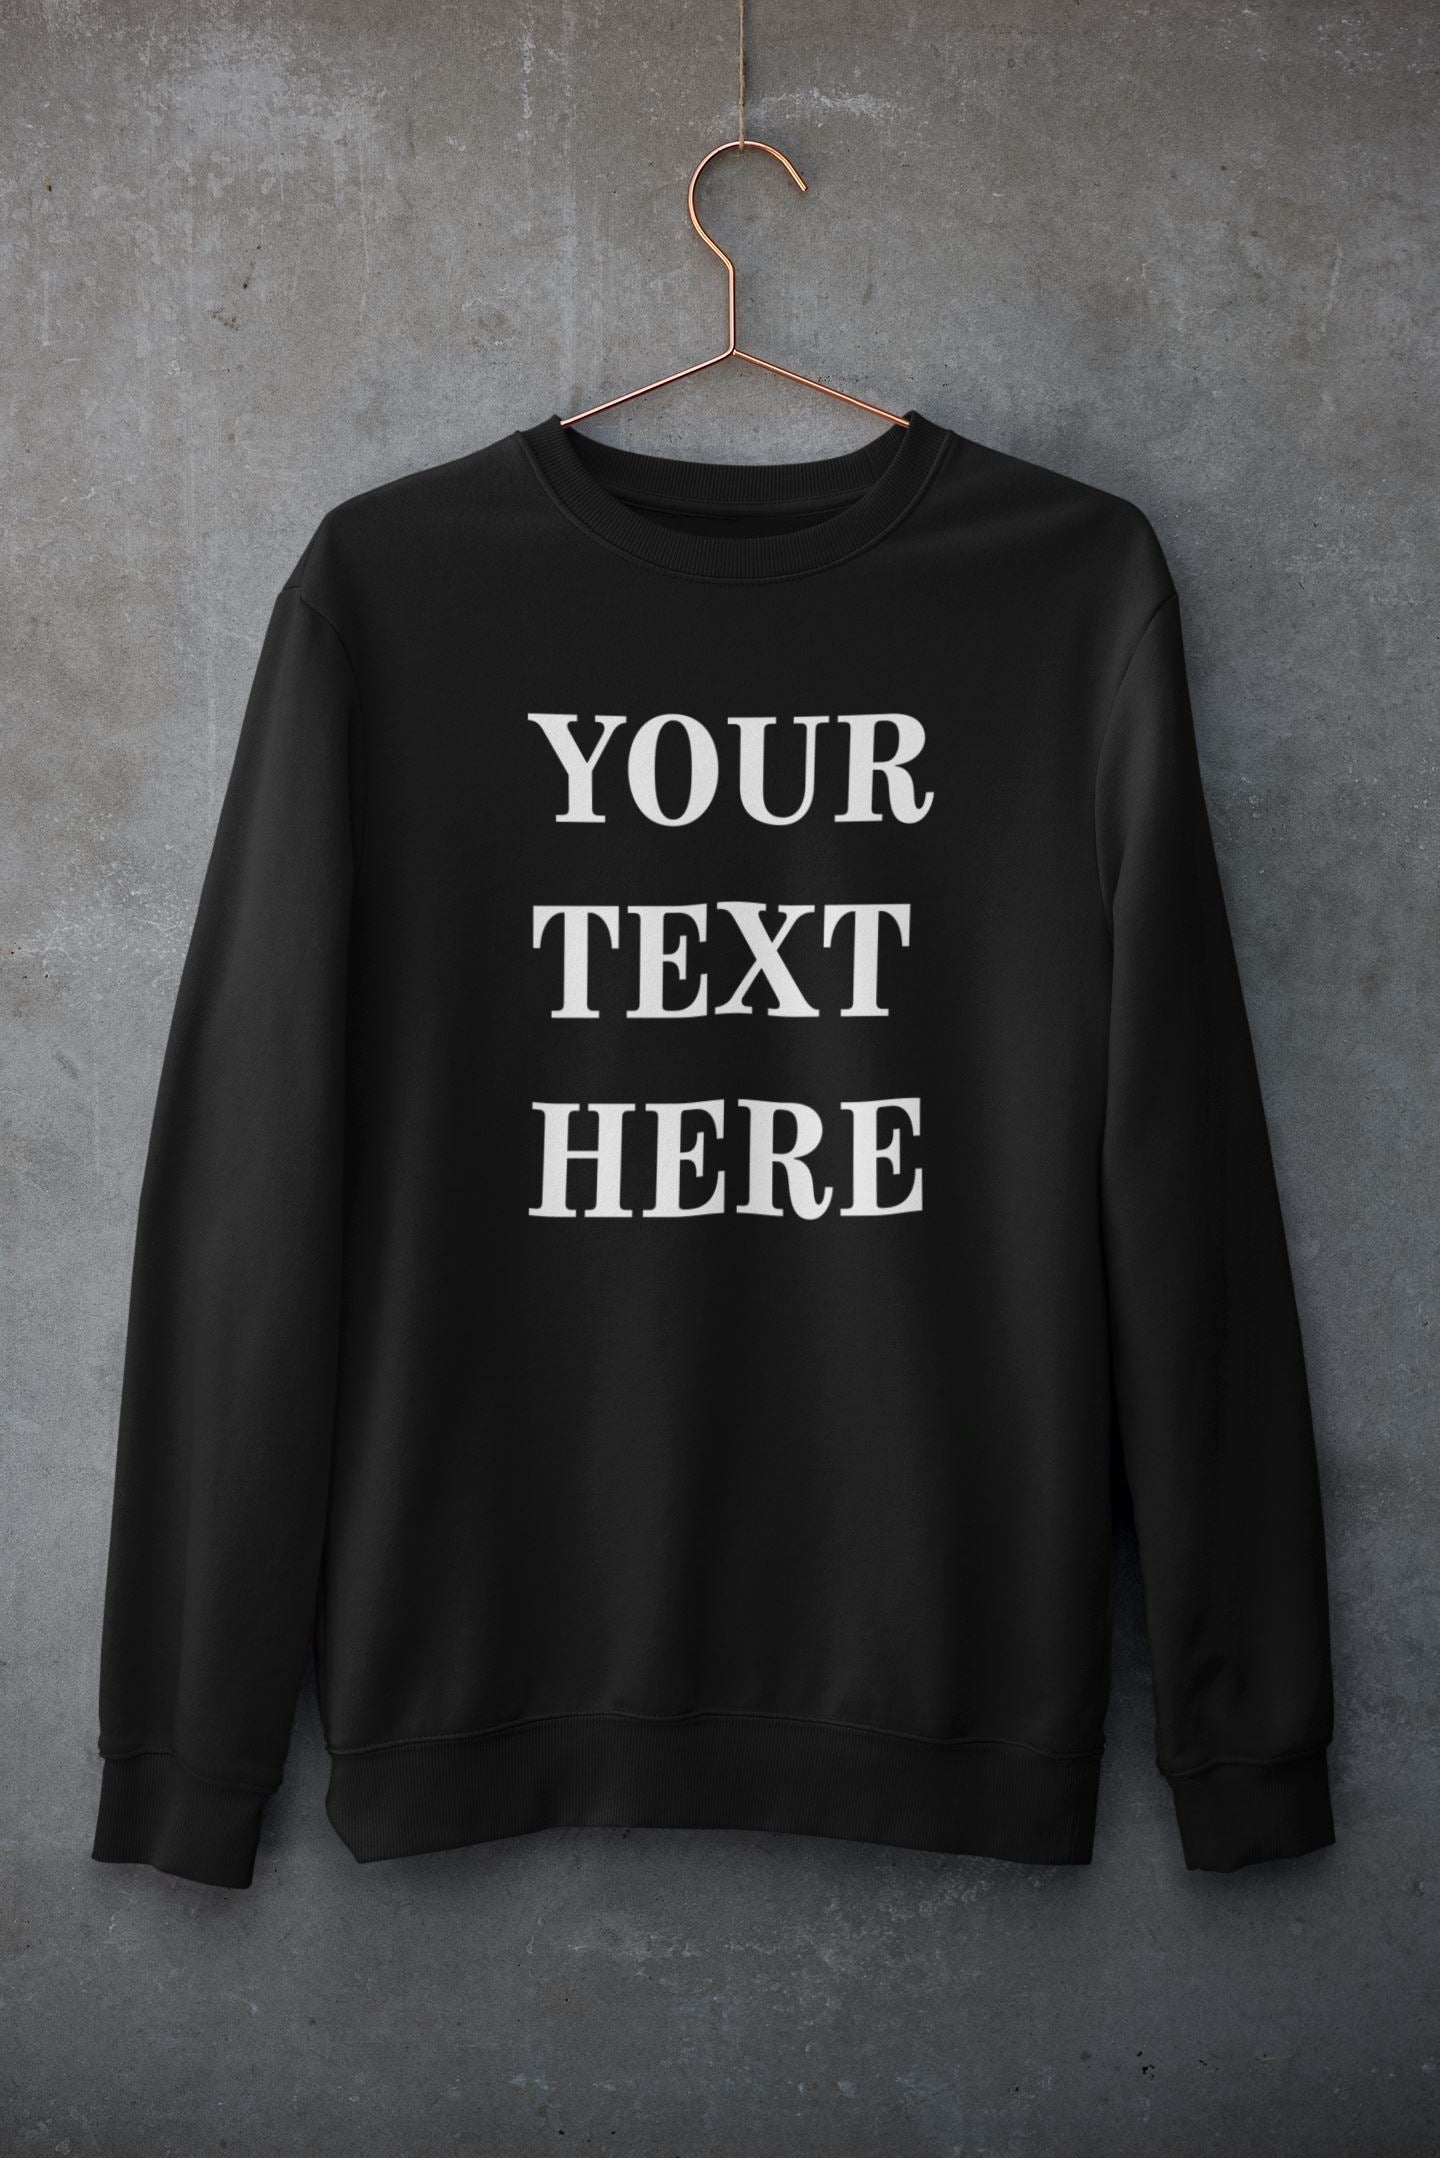 Personalised Sweatshirts with your Text